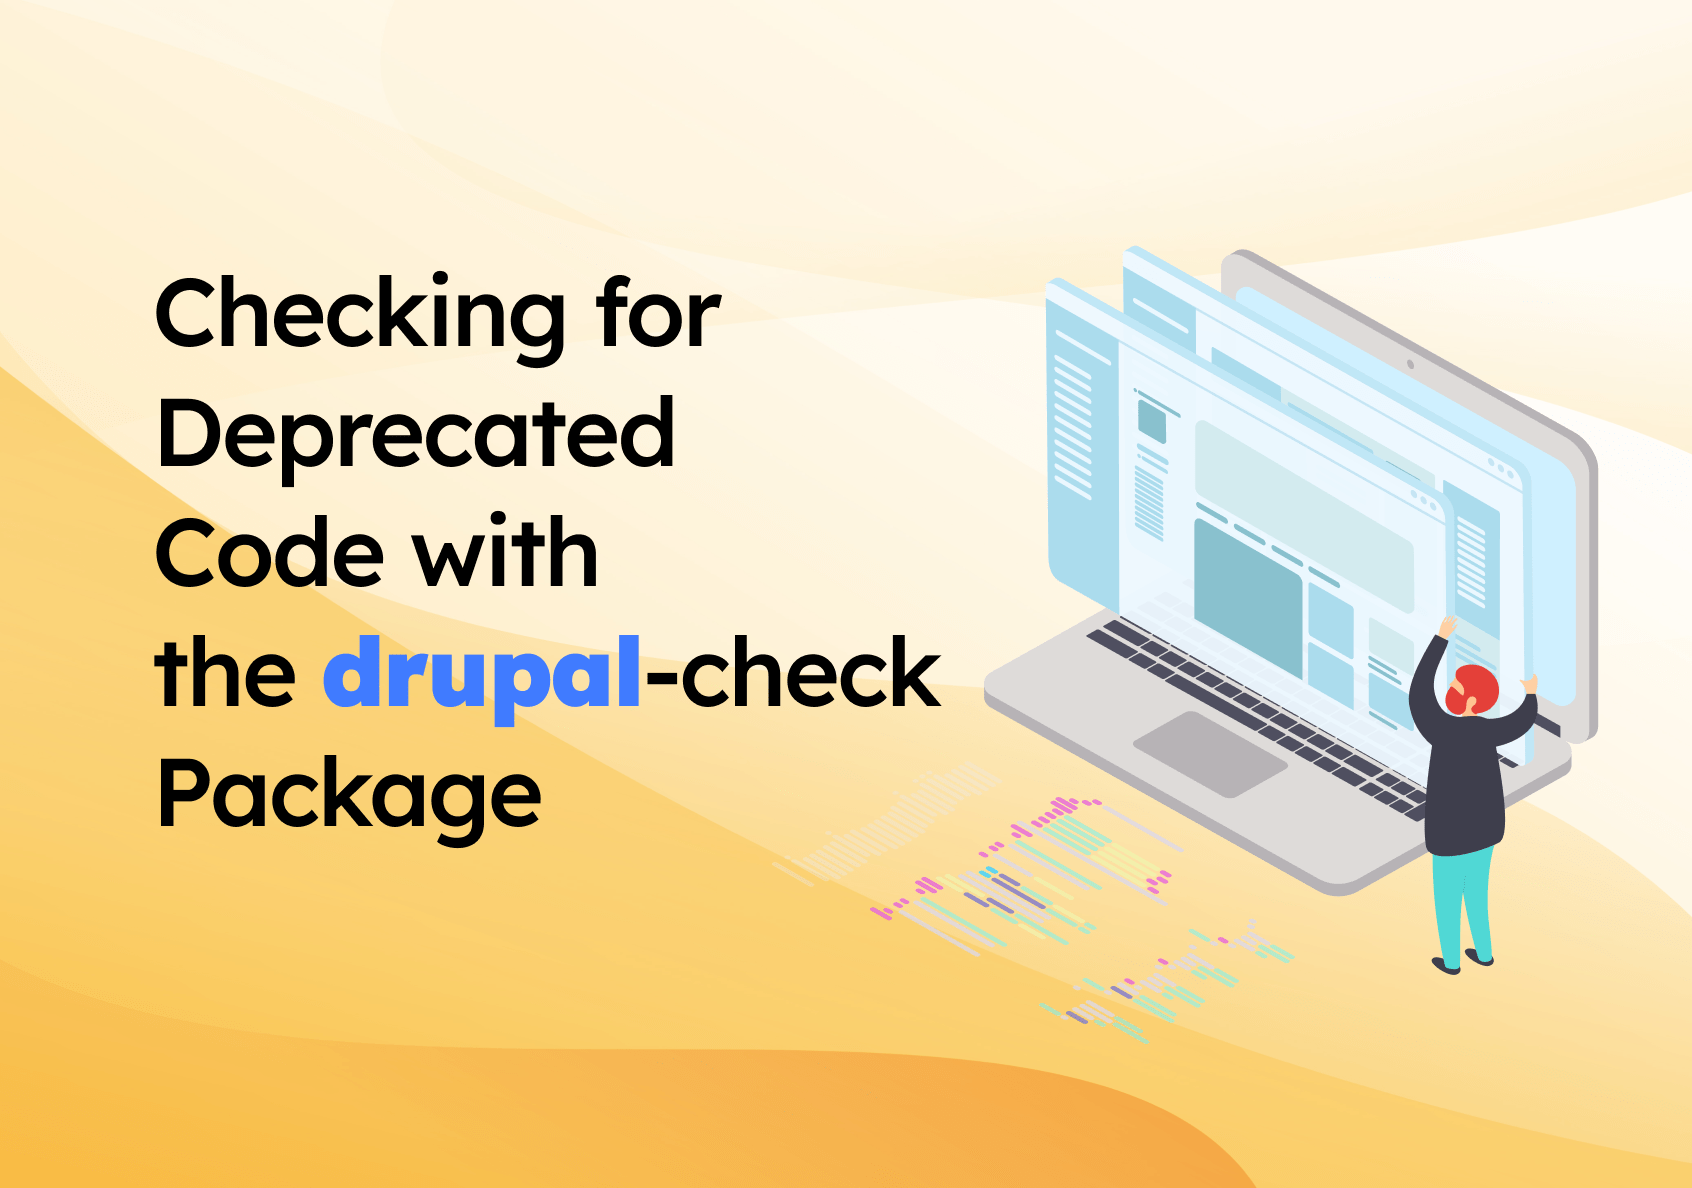 Checking for Deprecated Code with the drupal-check Package